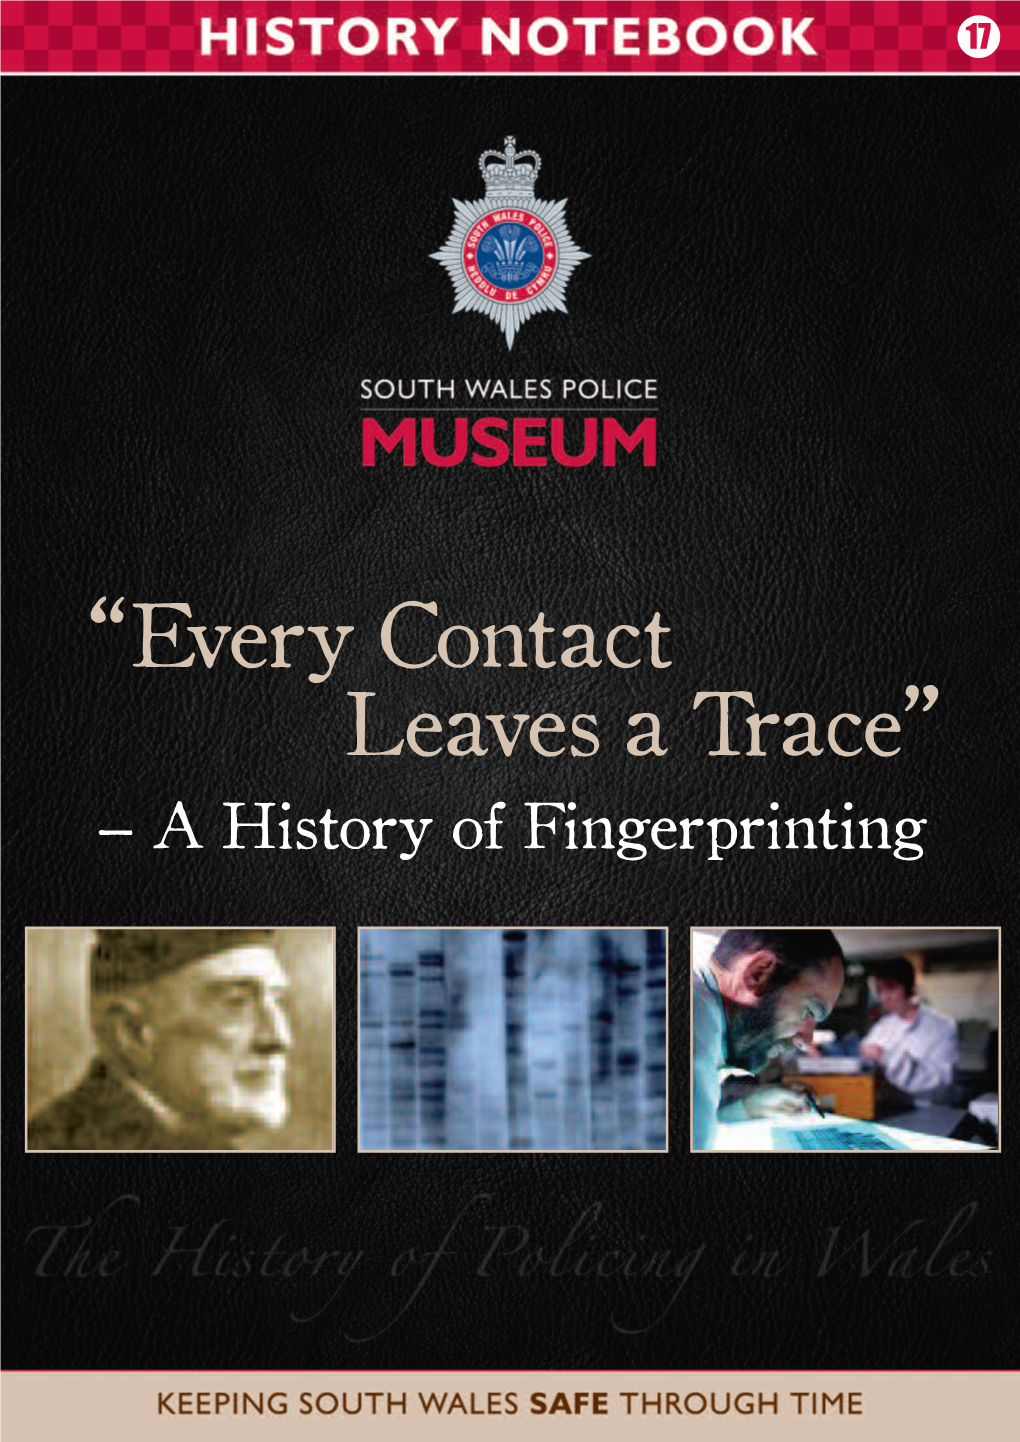 A History of Fingerprinting “Every Contact Leaves a Trace” – a History of Fingerprinting